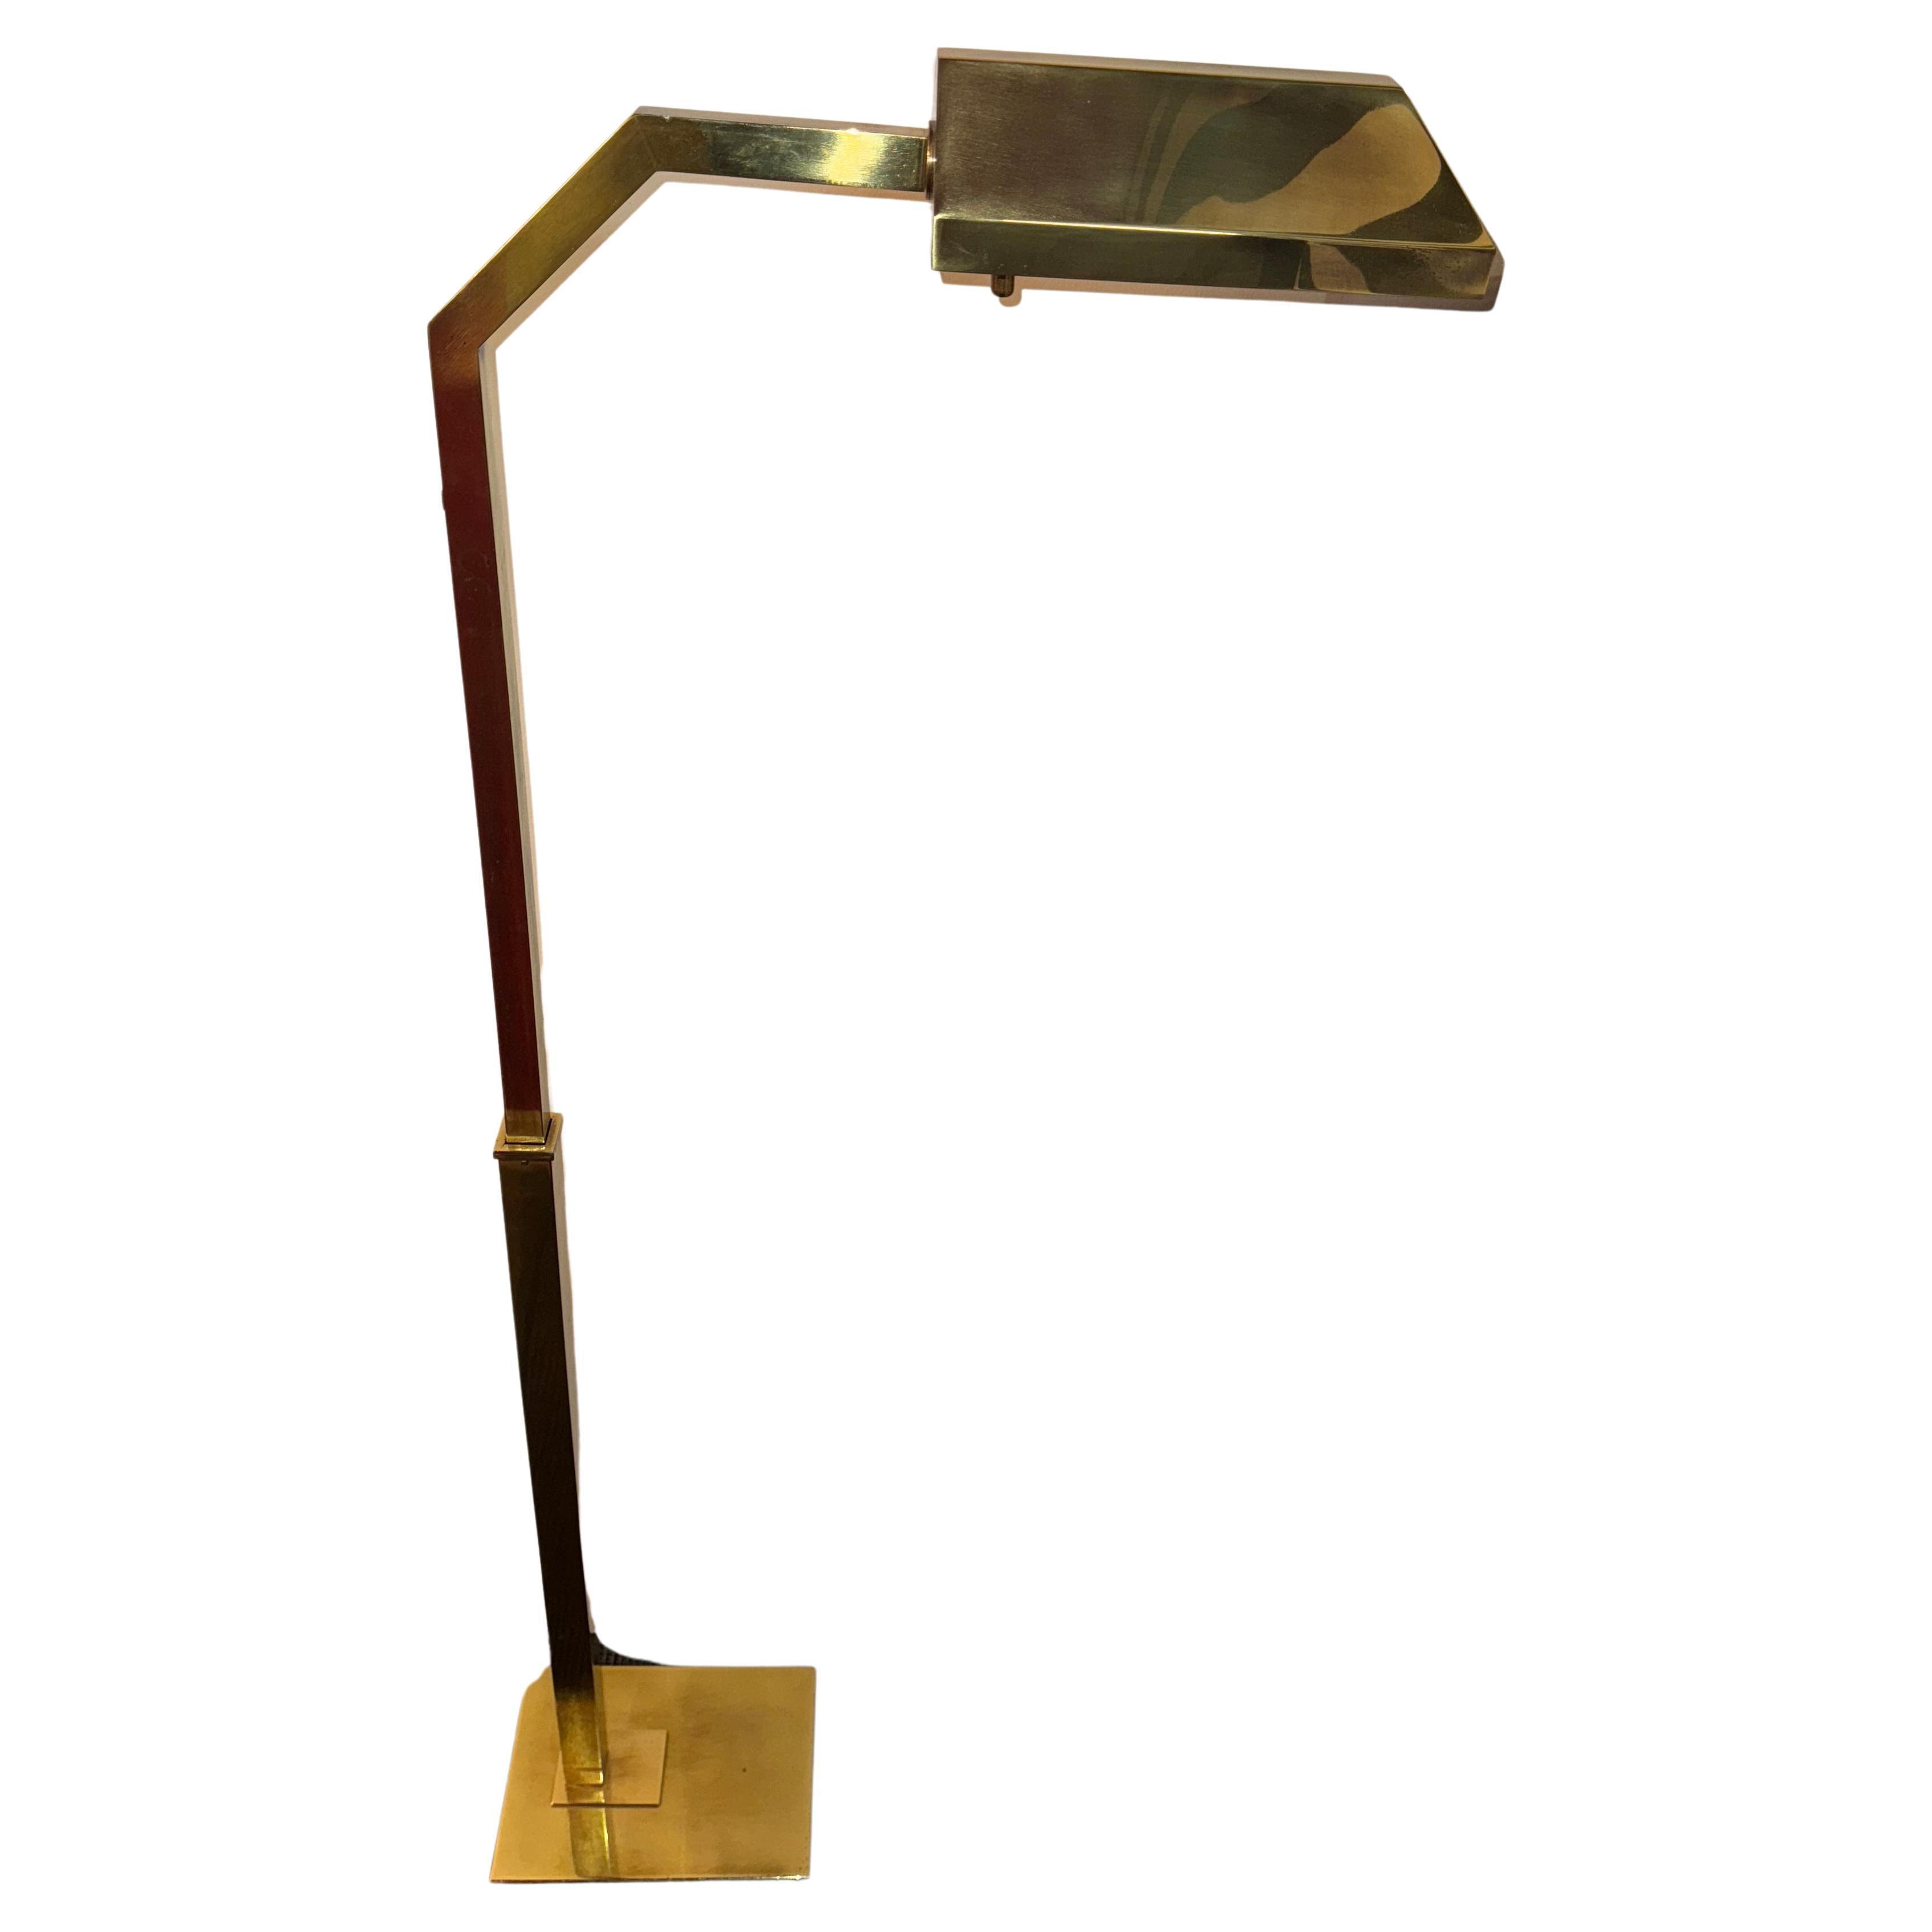 1970's Pharmacy Style Floor Lamp
Hand-Rubbed Antiqued Brass
Fitted with an extendable base
Minimum Height: 36.5
Maximum Height: 52
